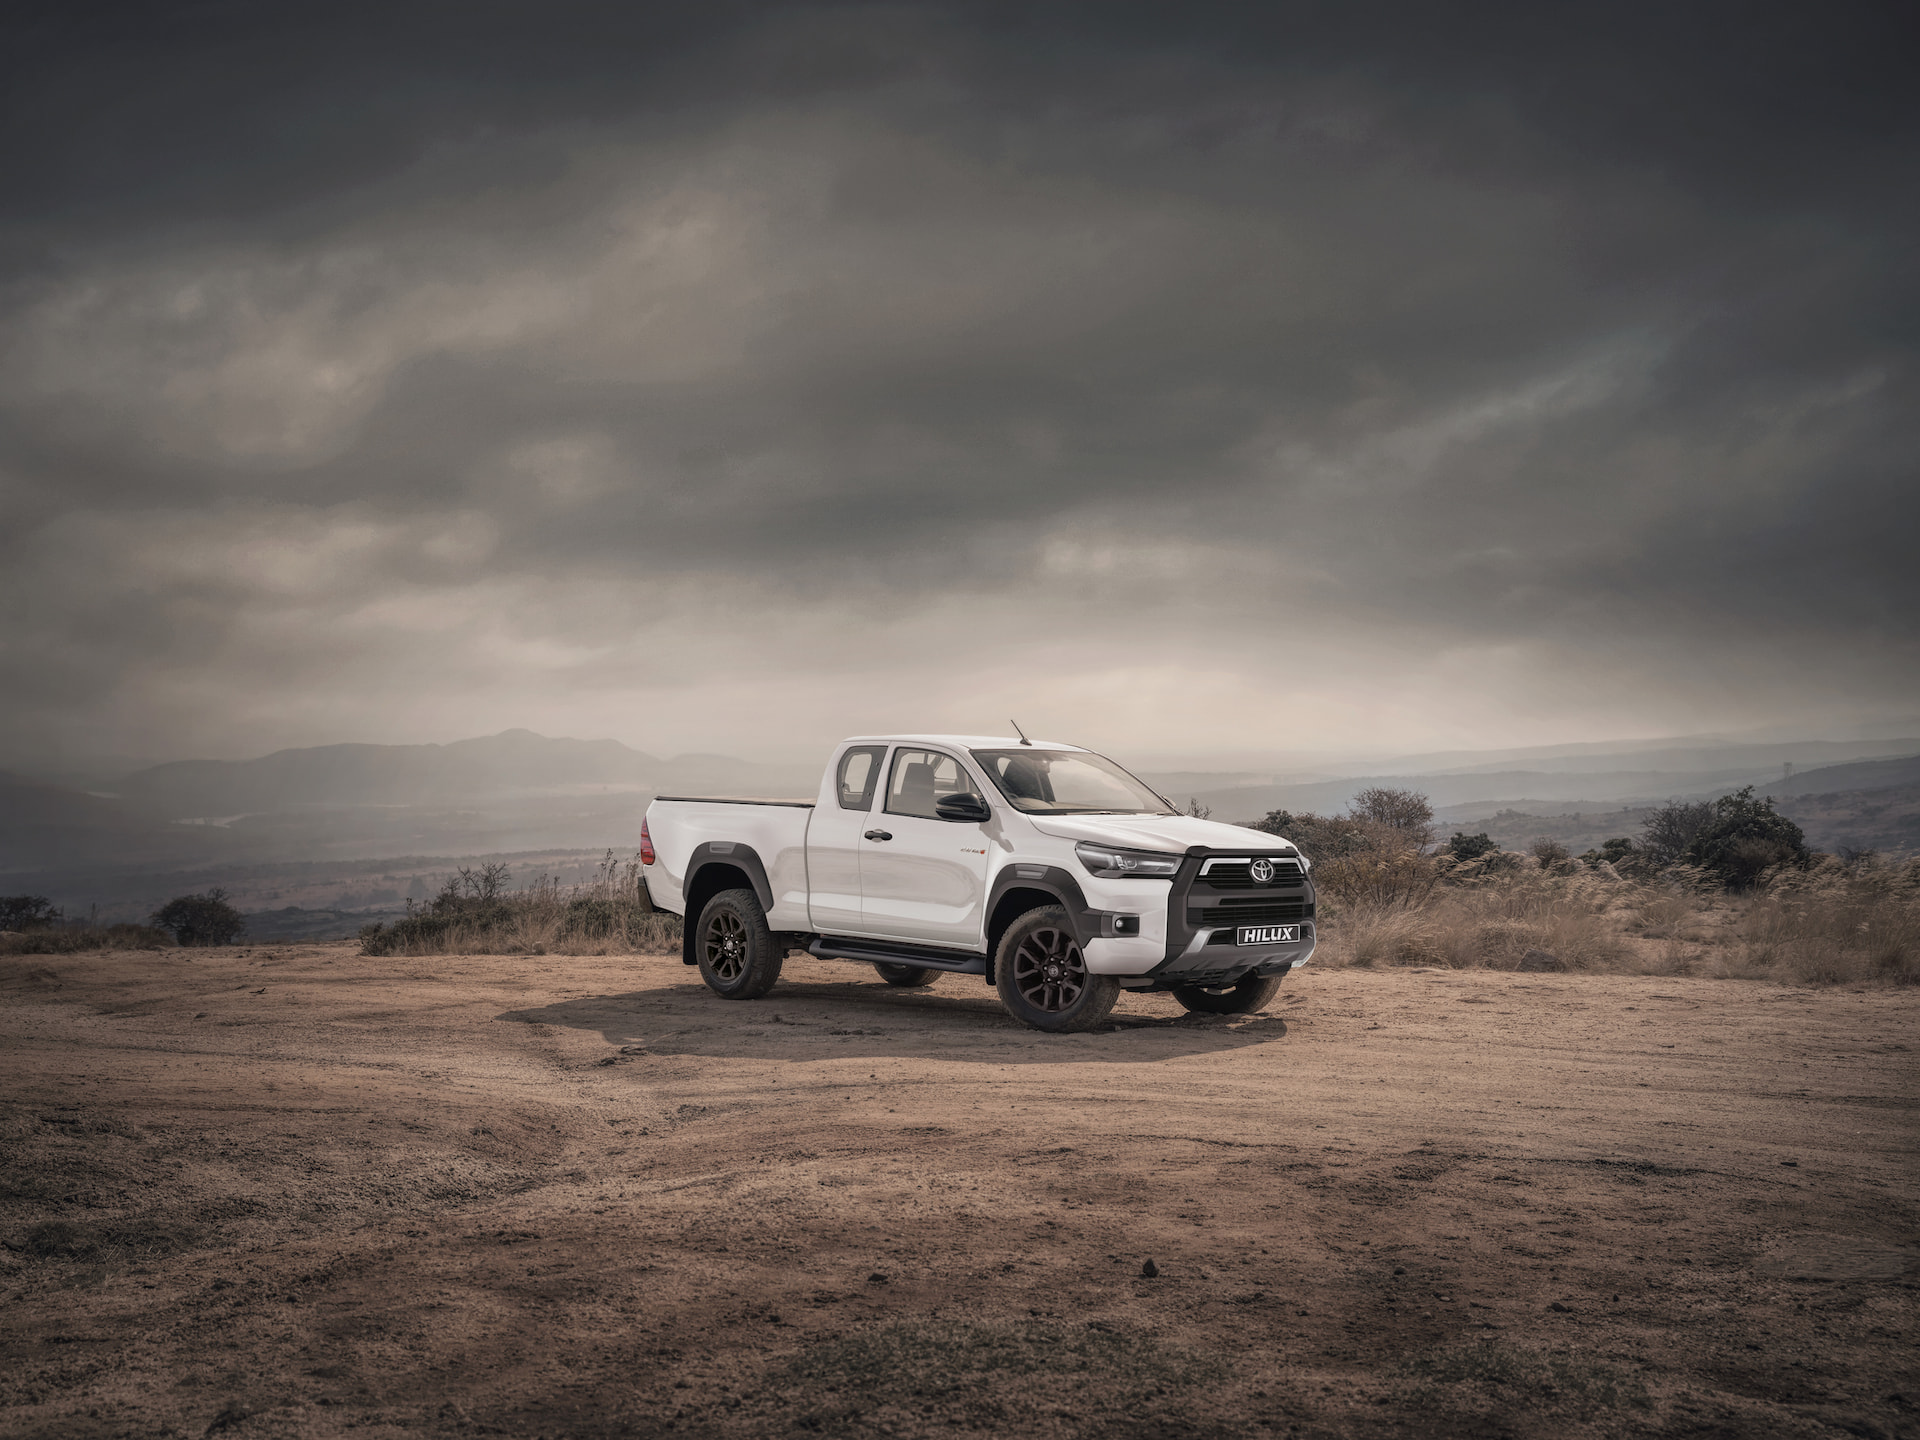 Toyota Hilux Xtra Features for South Africa’s Favorite Bakkie